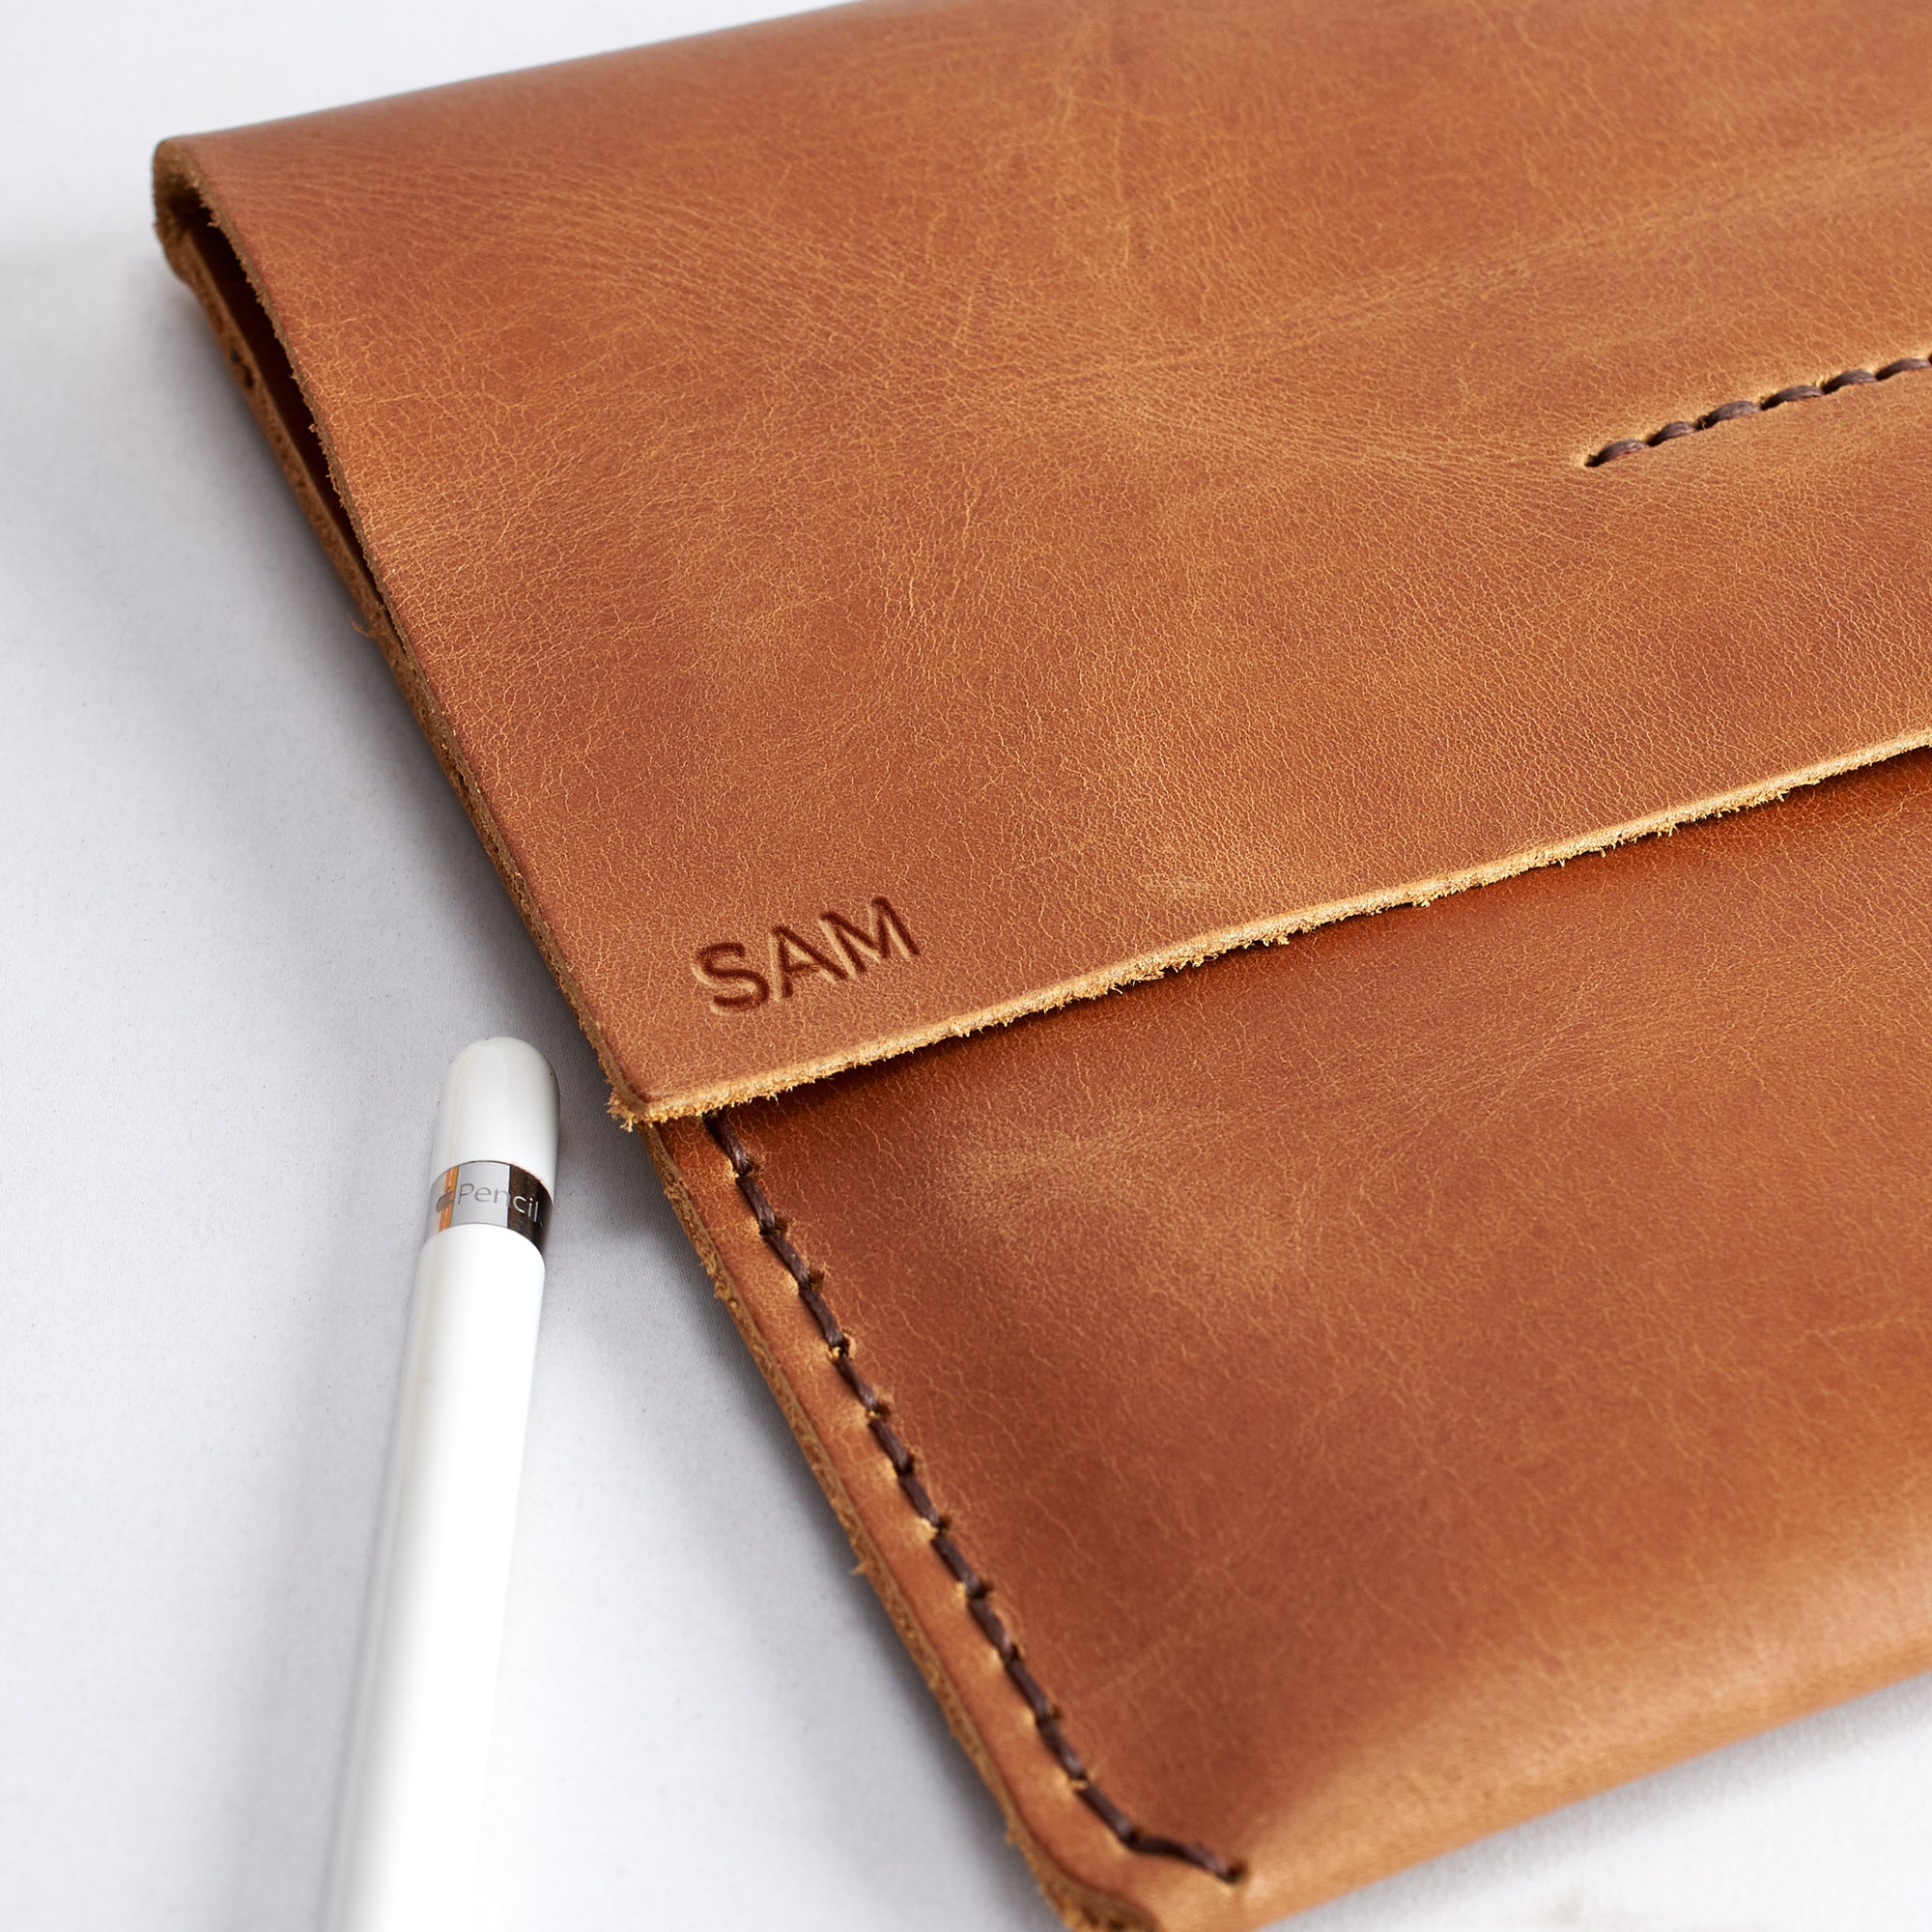 Custom Embossing. iPad Sleeve. Leather Case Tan for iPad by Capra Leather